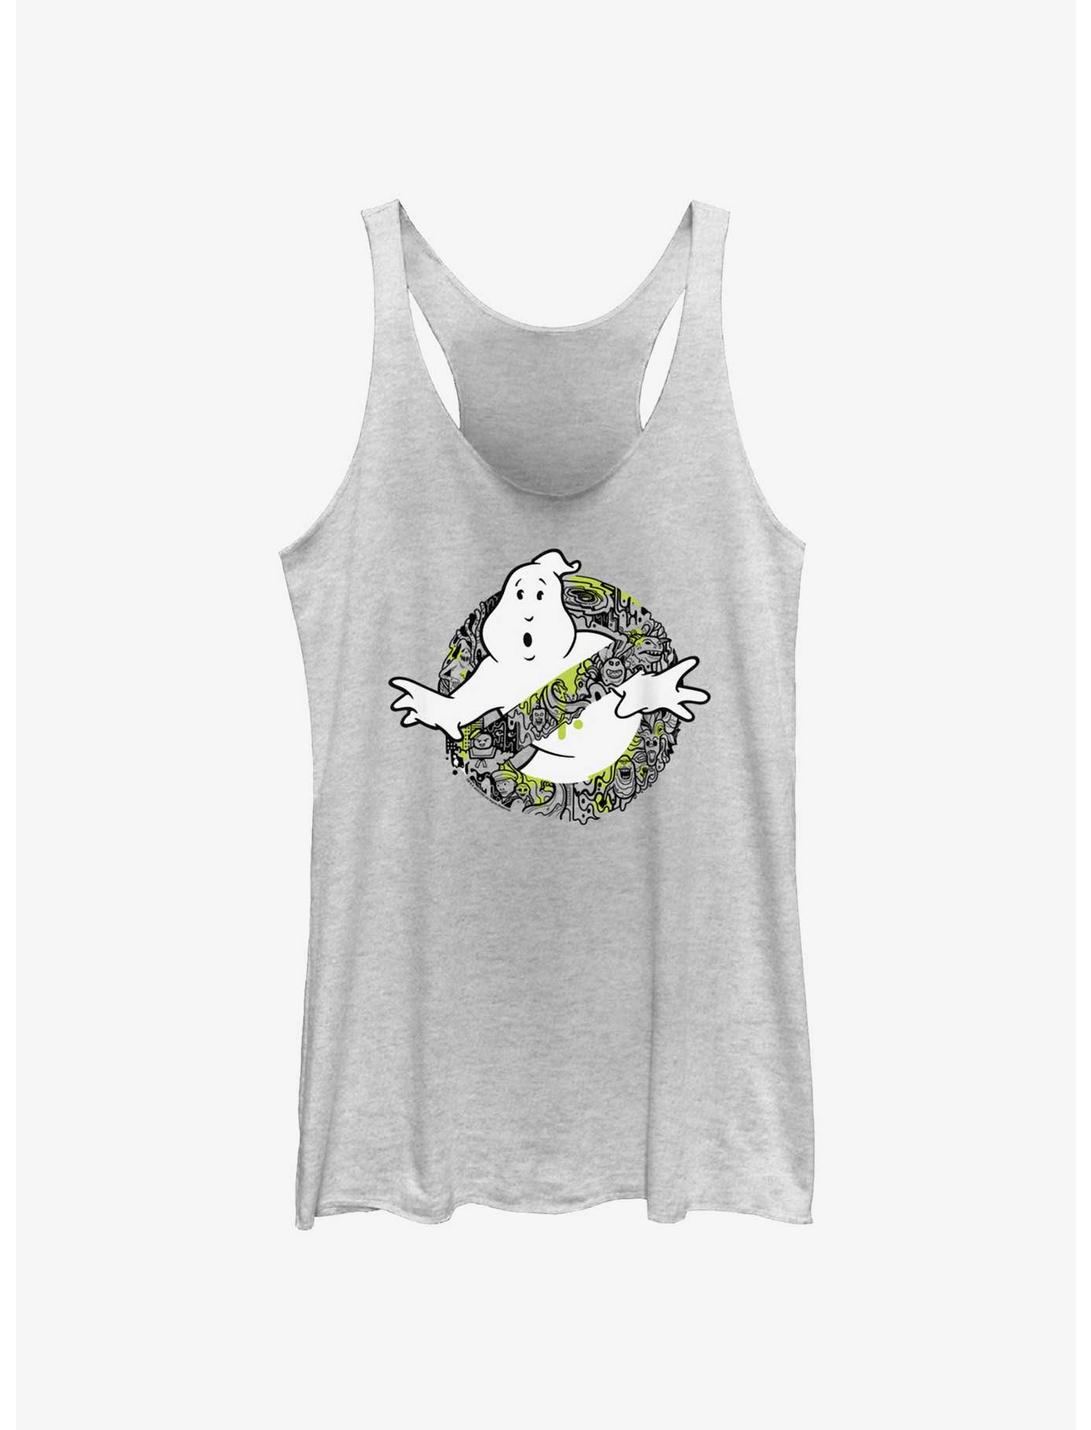 Ghostbusters: Frozen Empire Busting Ghosts Womens Tank Top, WHITE HTR, hi-res